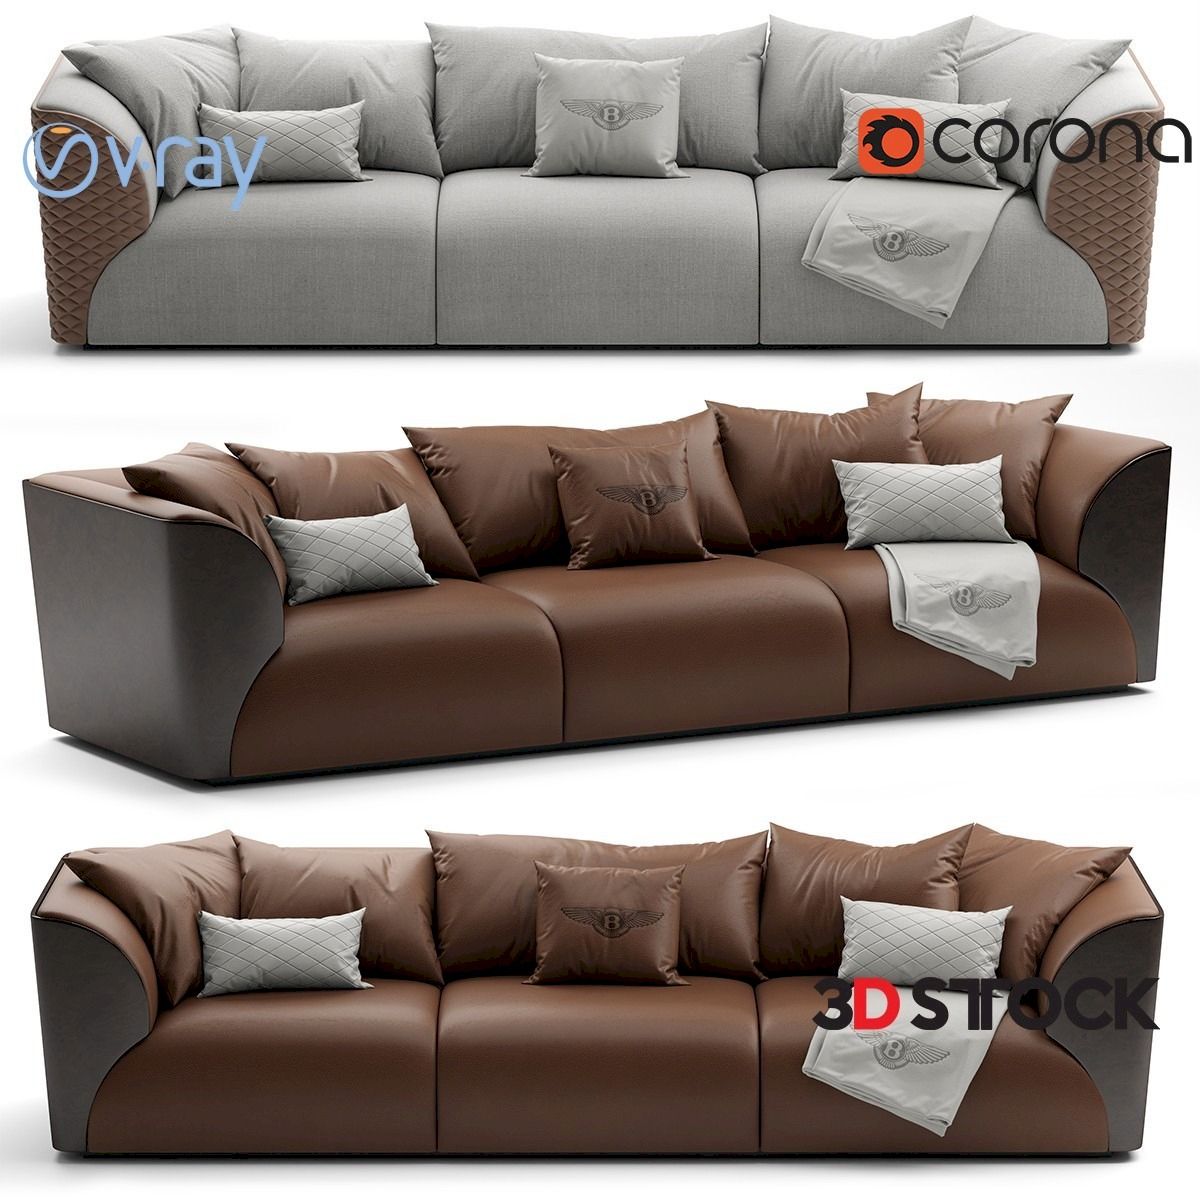 Bentley Home Winston Sofa – 3d Stock : 3d Models For Inside Winston Sofa Sectional Sofas (View 15 of 15)